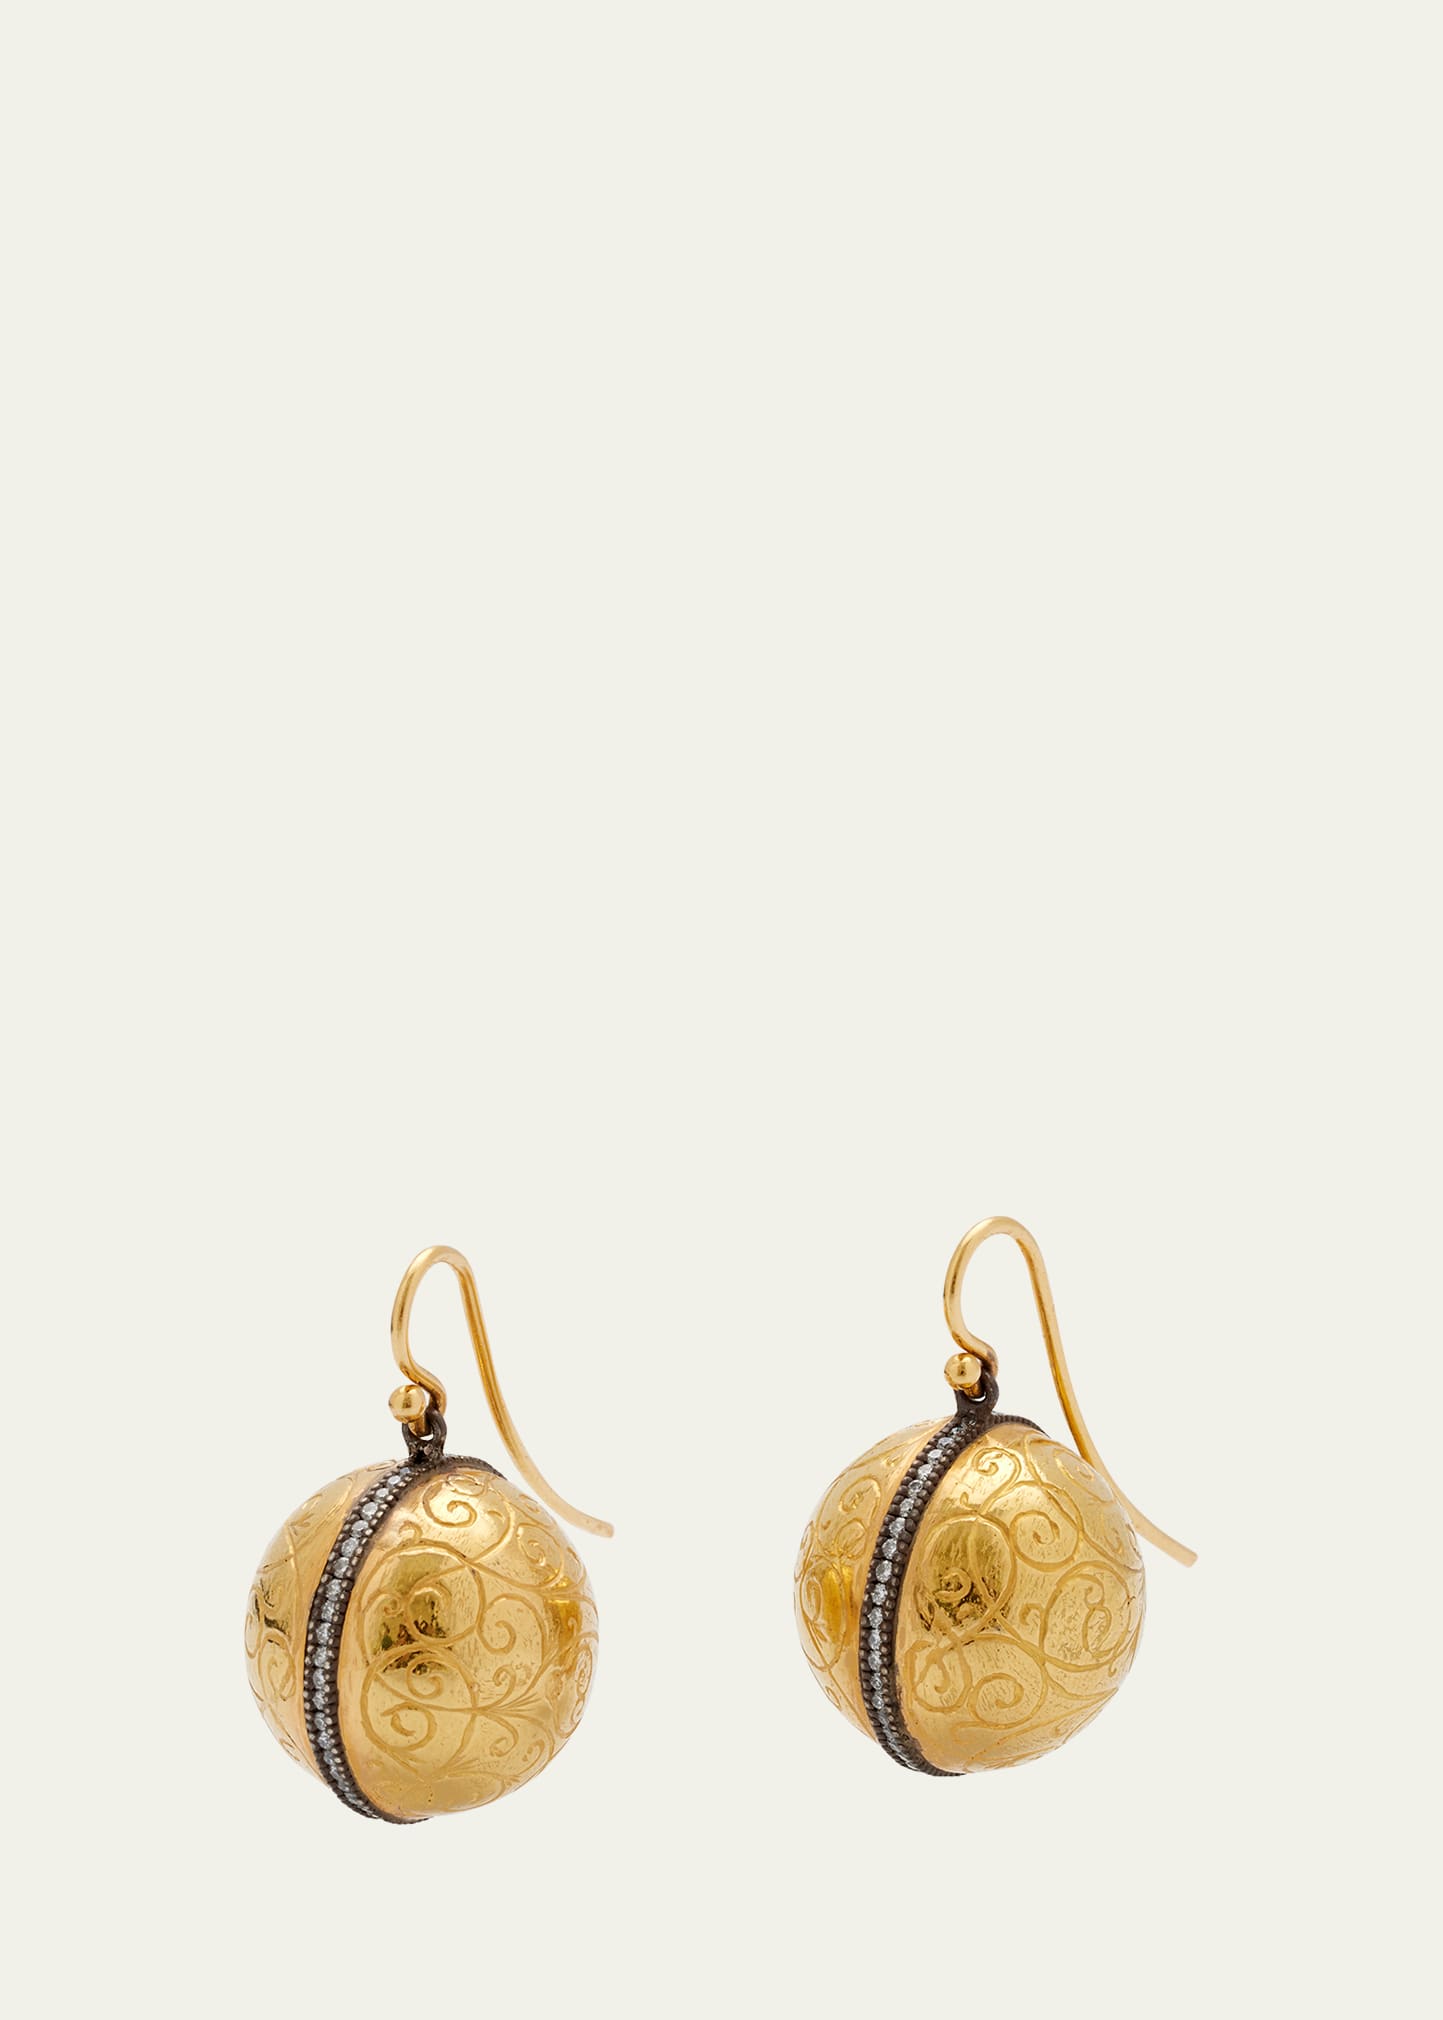 Engraved Ball Earrings with Diamonds